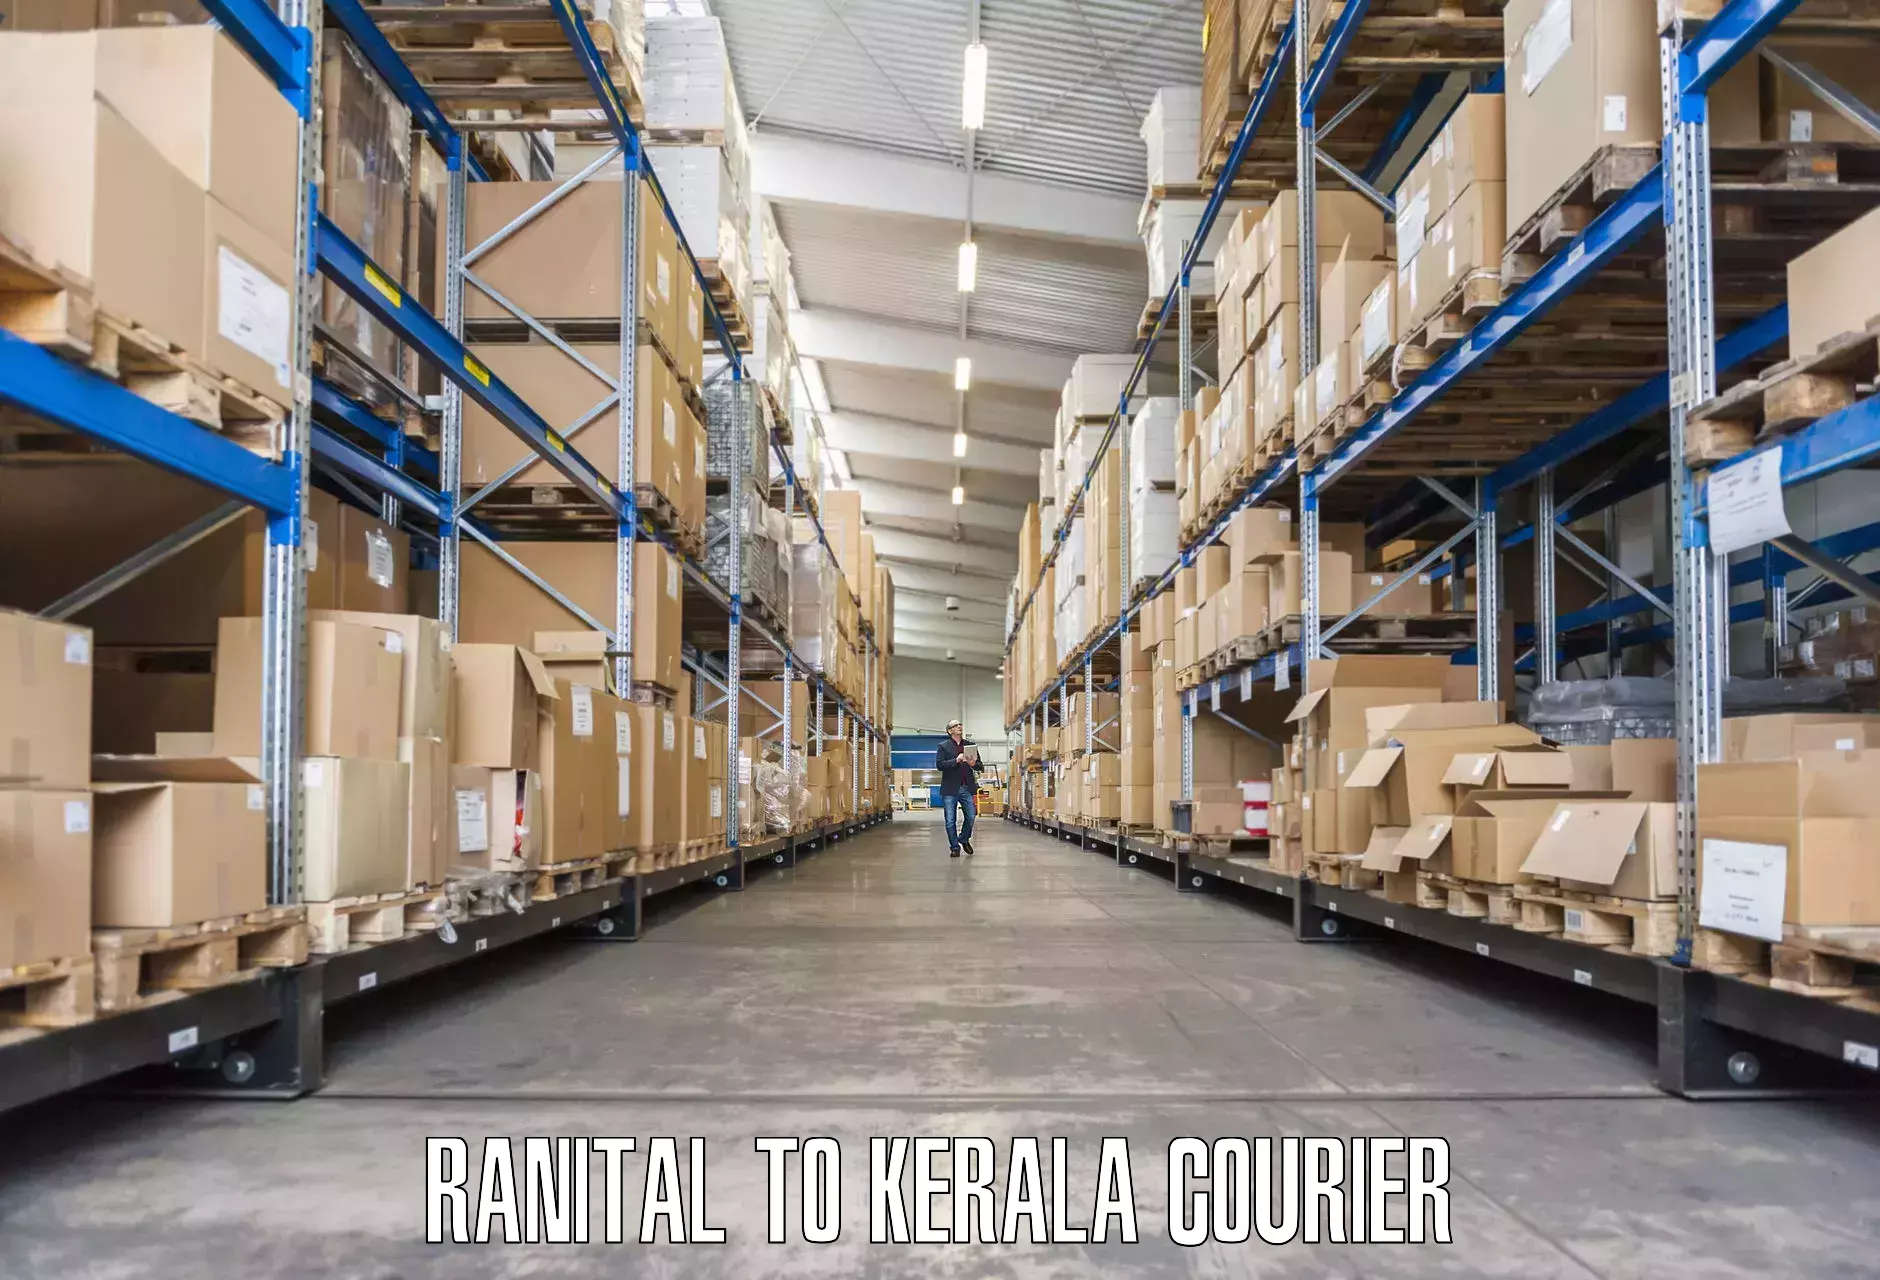 Moving and storage services in Ranital to Kerala